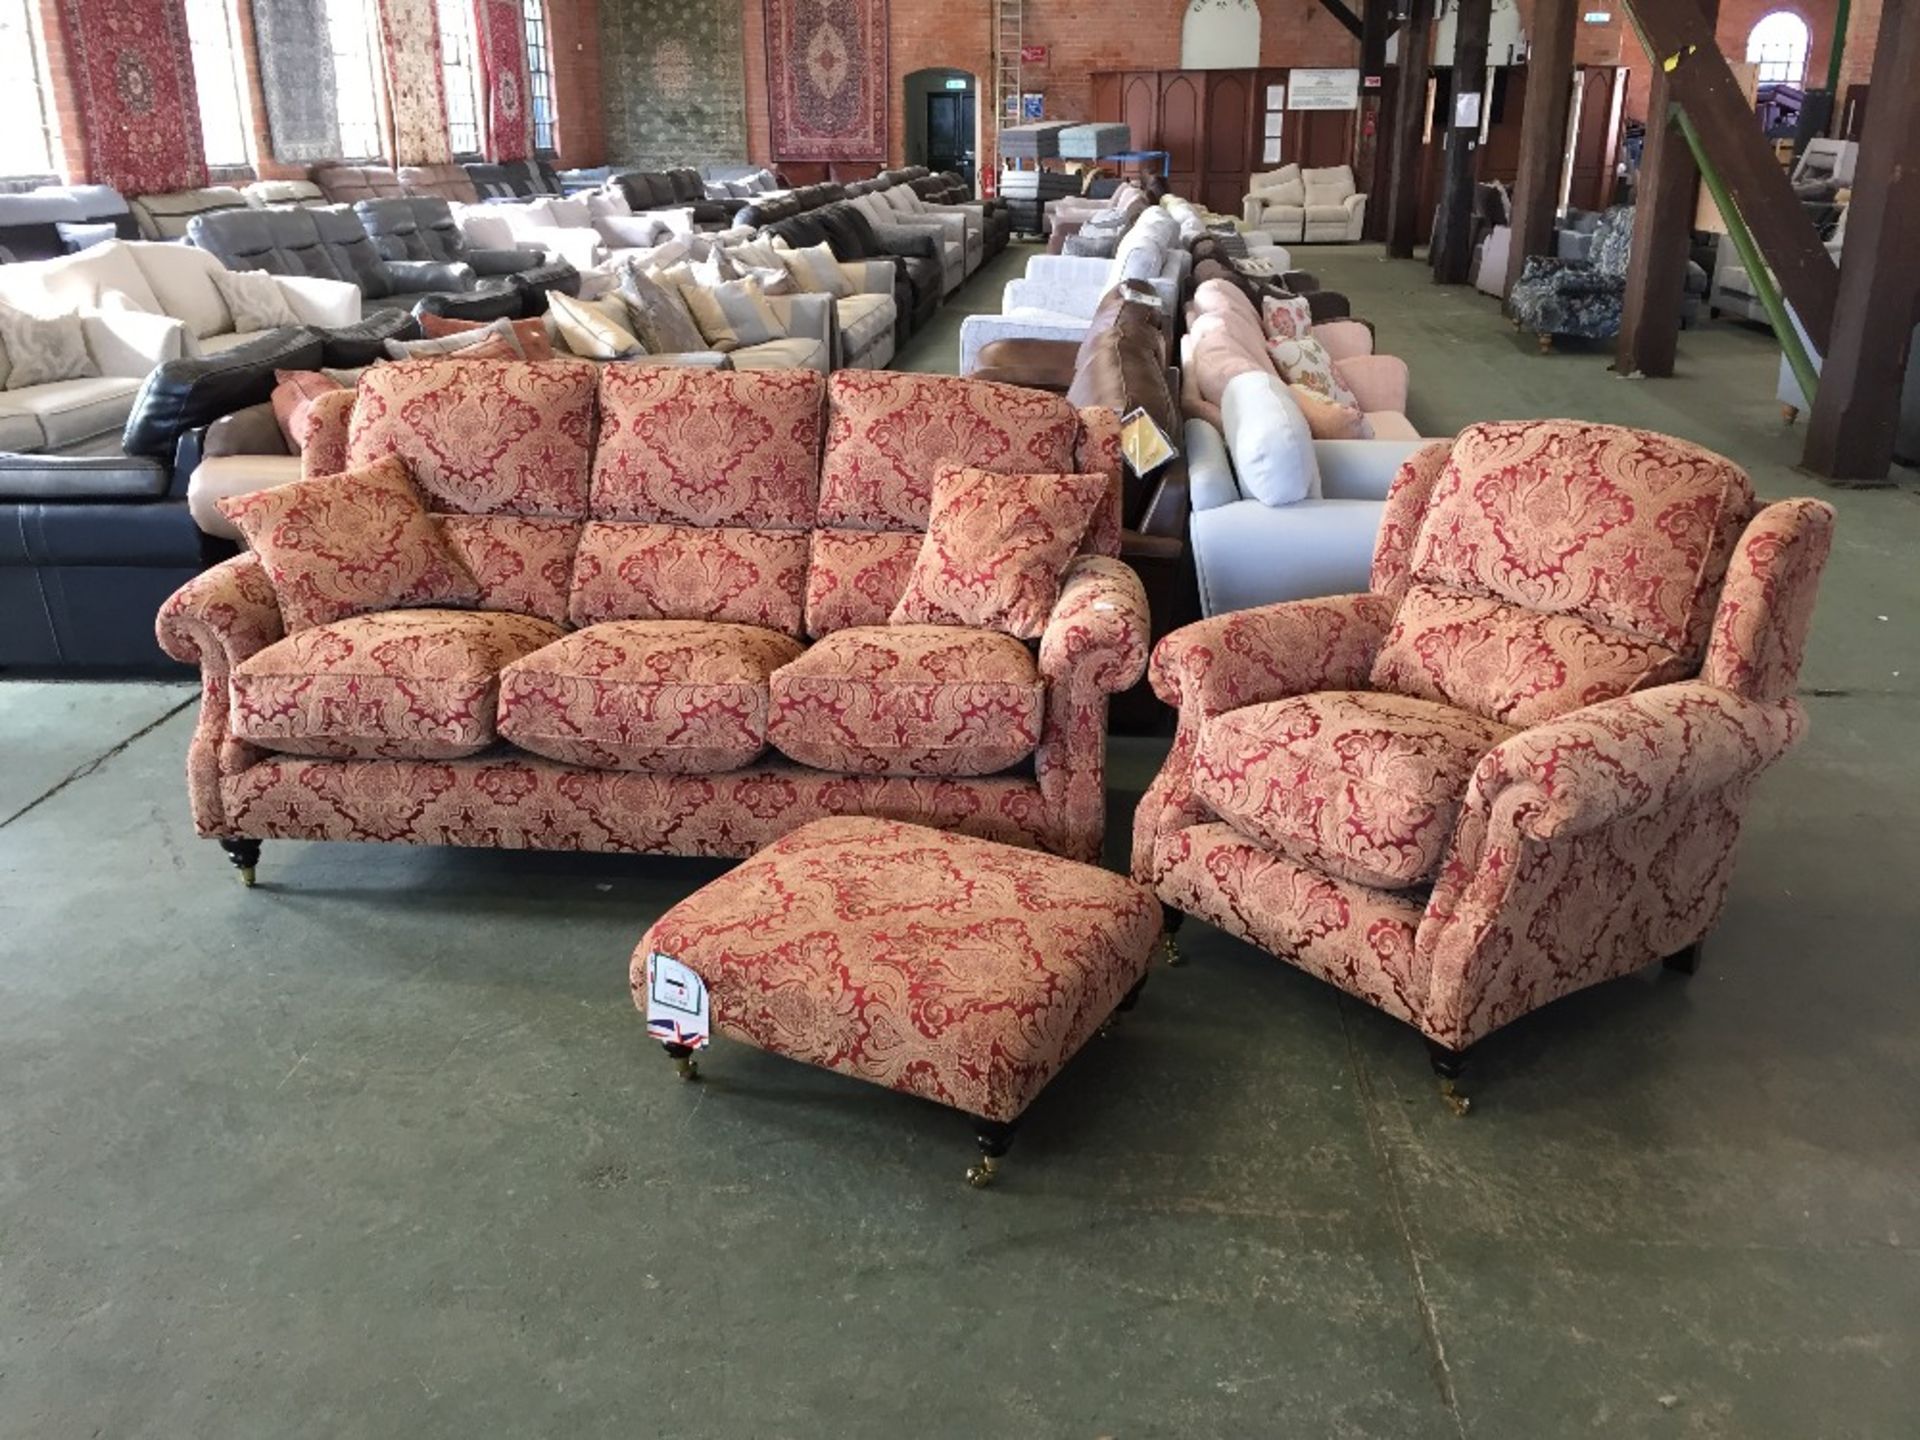 RED AND GOLD FLORAL PATTERNED 3 SEATER SOFA CHAIR